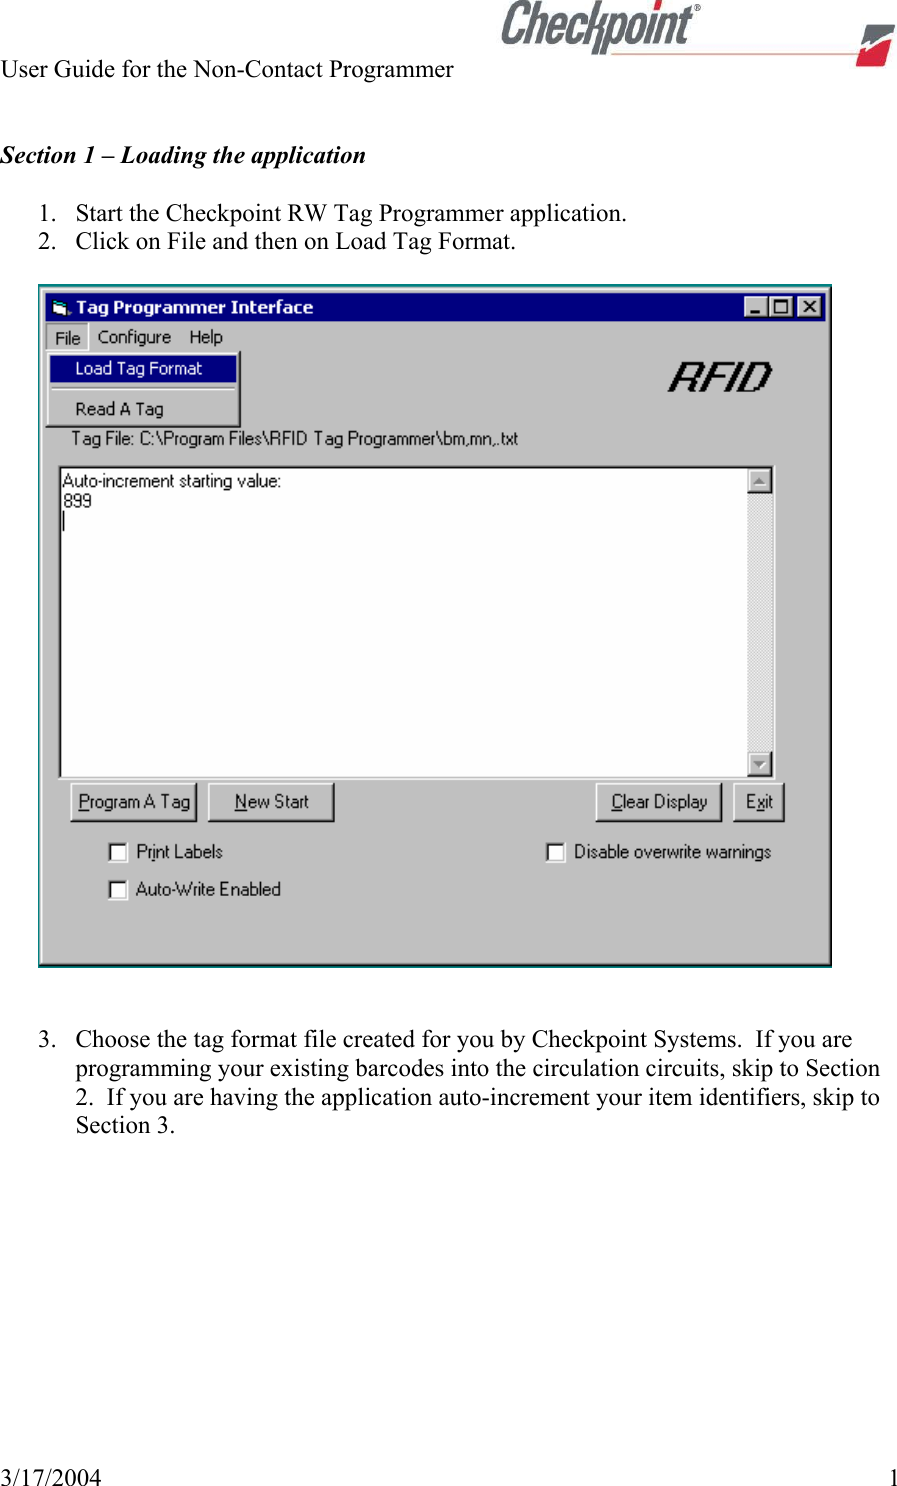 User Guide for the Non-Contact Programmer   3/17/2004   1   Section 1 – Loading the application  1. Start the Checkpoint RW Tag Programmer application. 2. Click on File and then on Load Tag Format.     3. Choose the tag format file created for you by Checkpoint Systems.  If you are programming your existing barcodes into the circulation circuits, skip to Section 2.  If you are having the application auto-increment your item identifiers, skip to Section 3.  